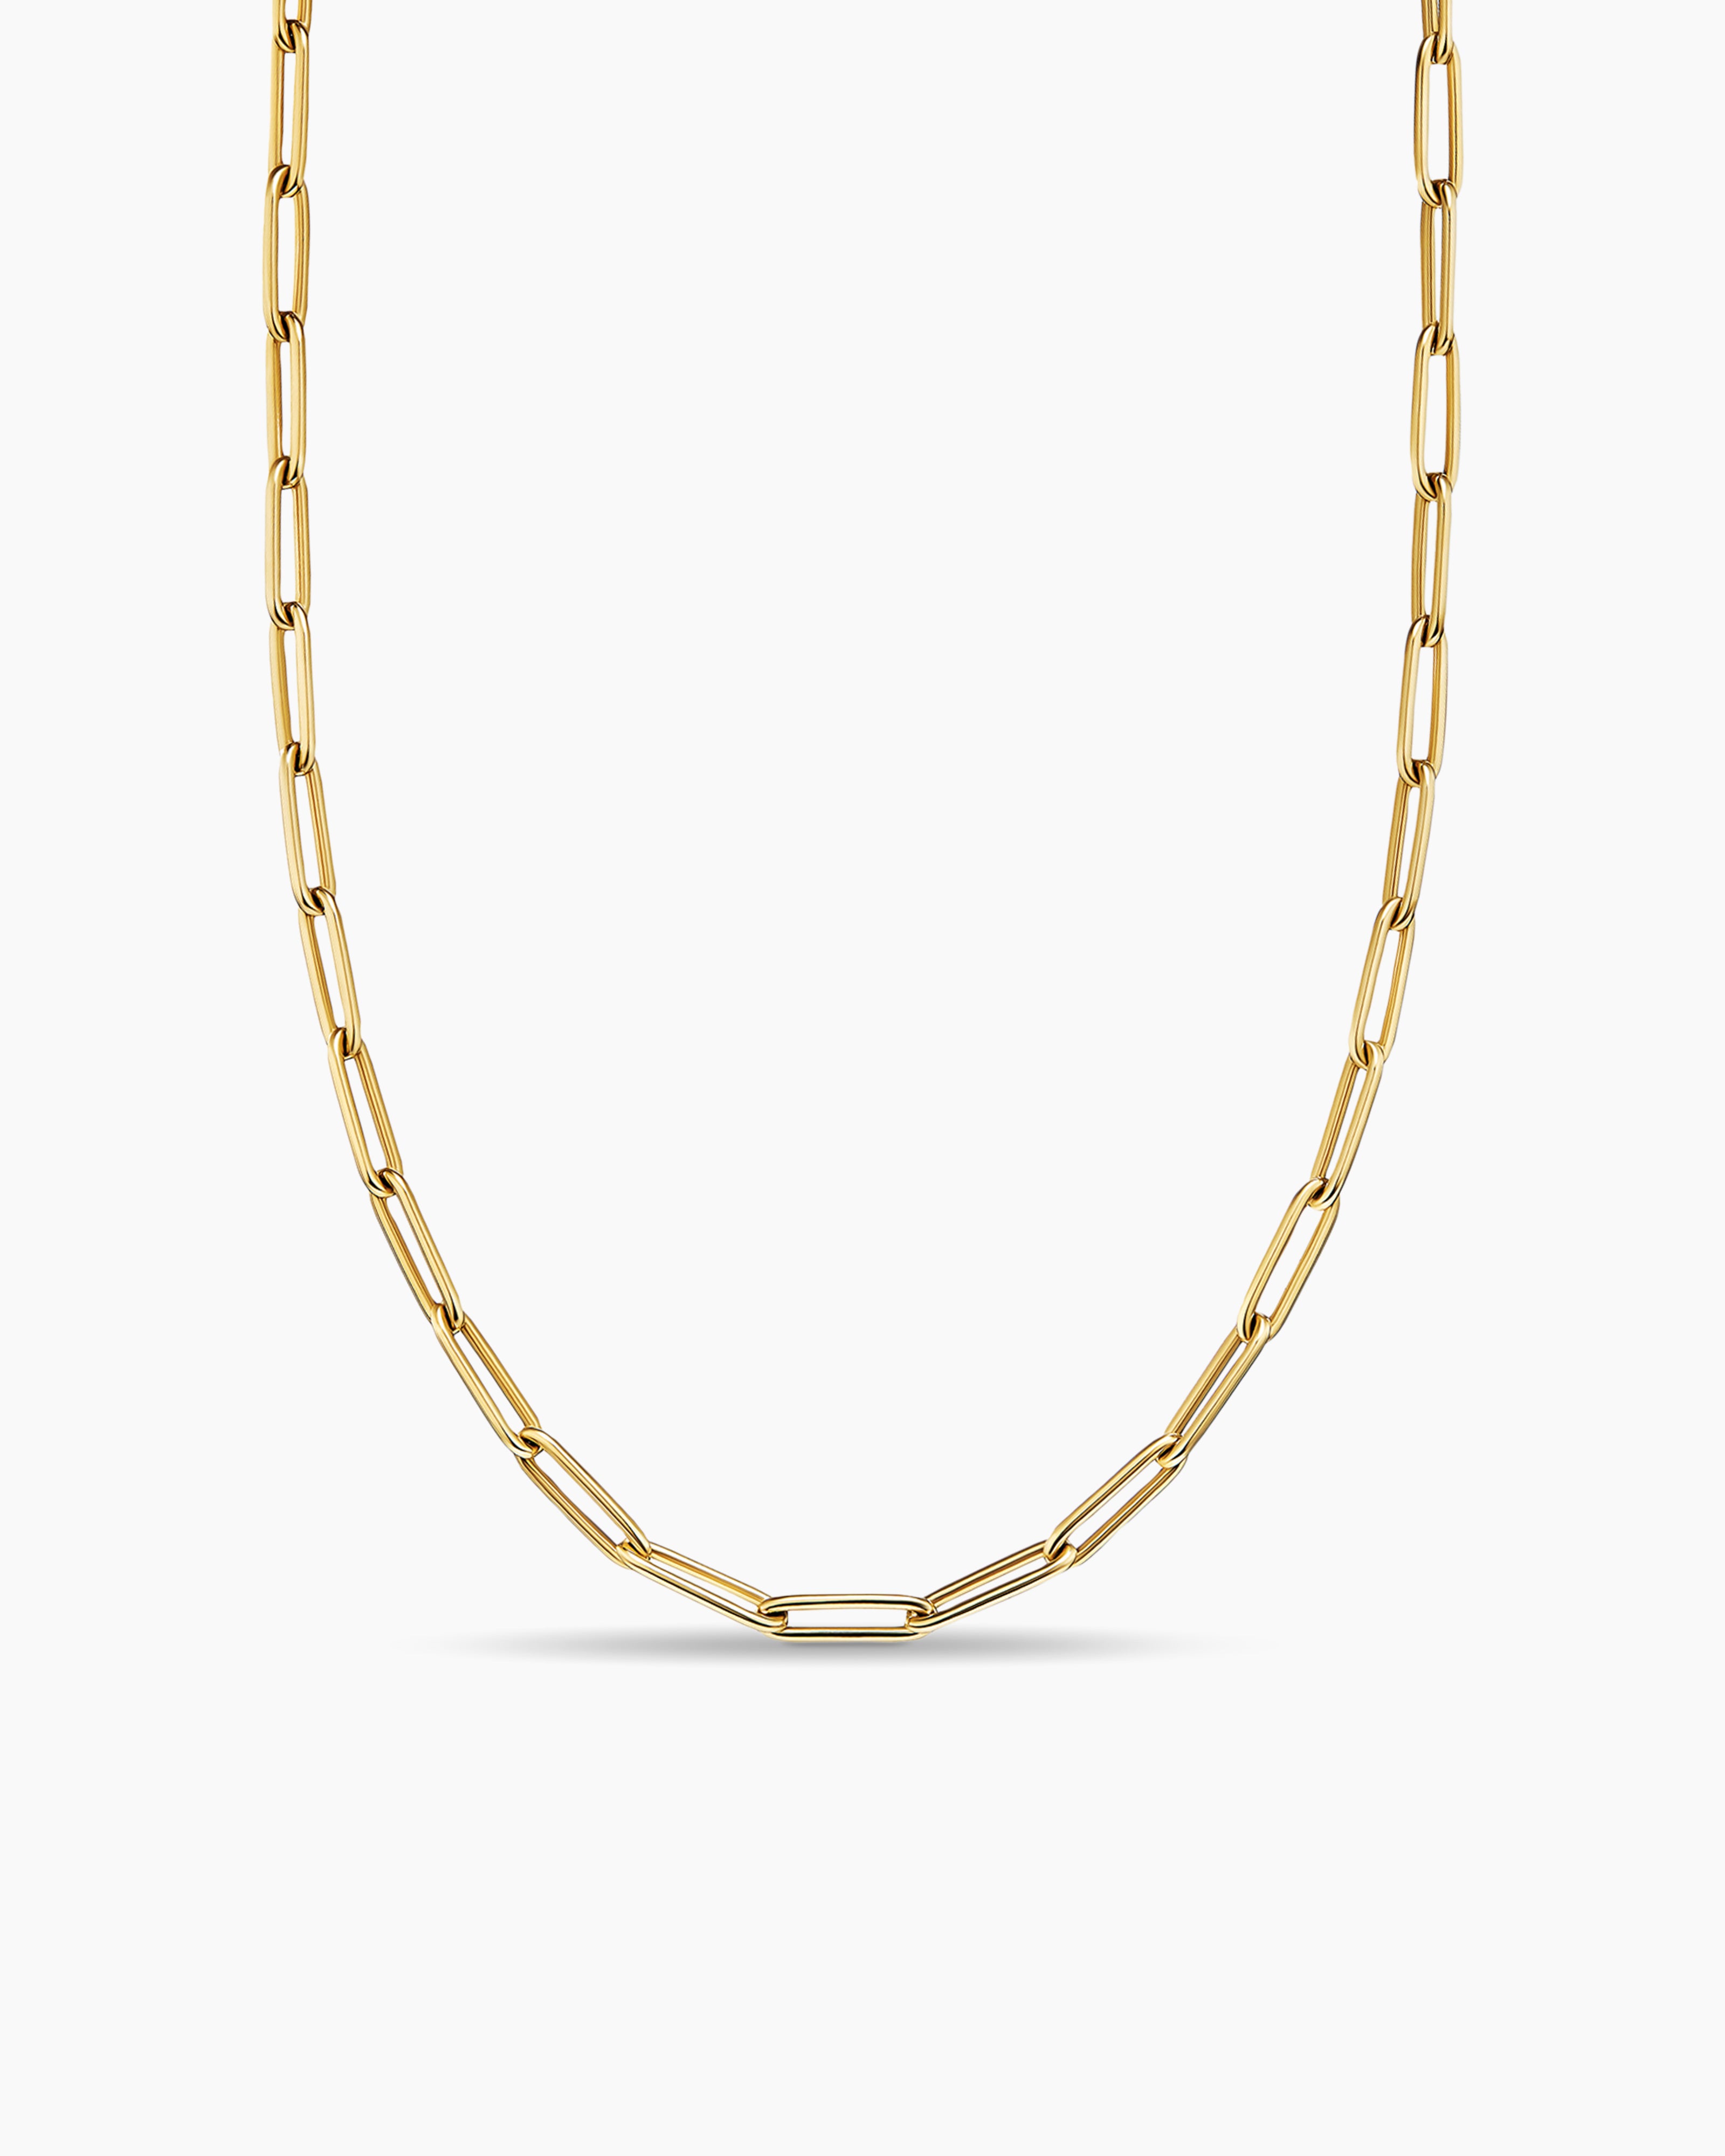 Heavy Chain Link Necklace in 14k Yellow Gold - Filigree Jewelers